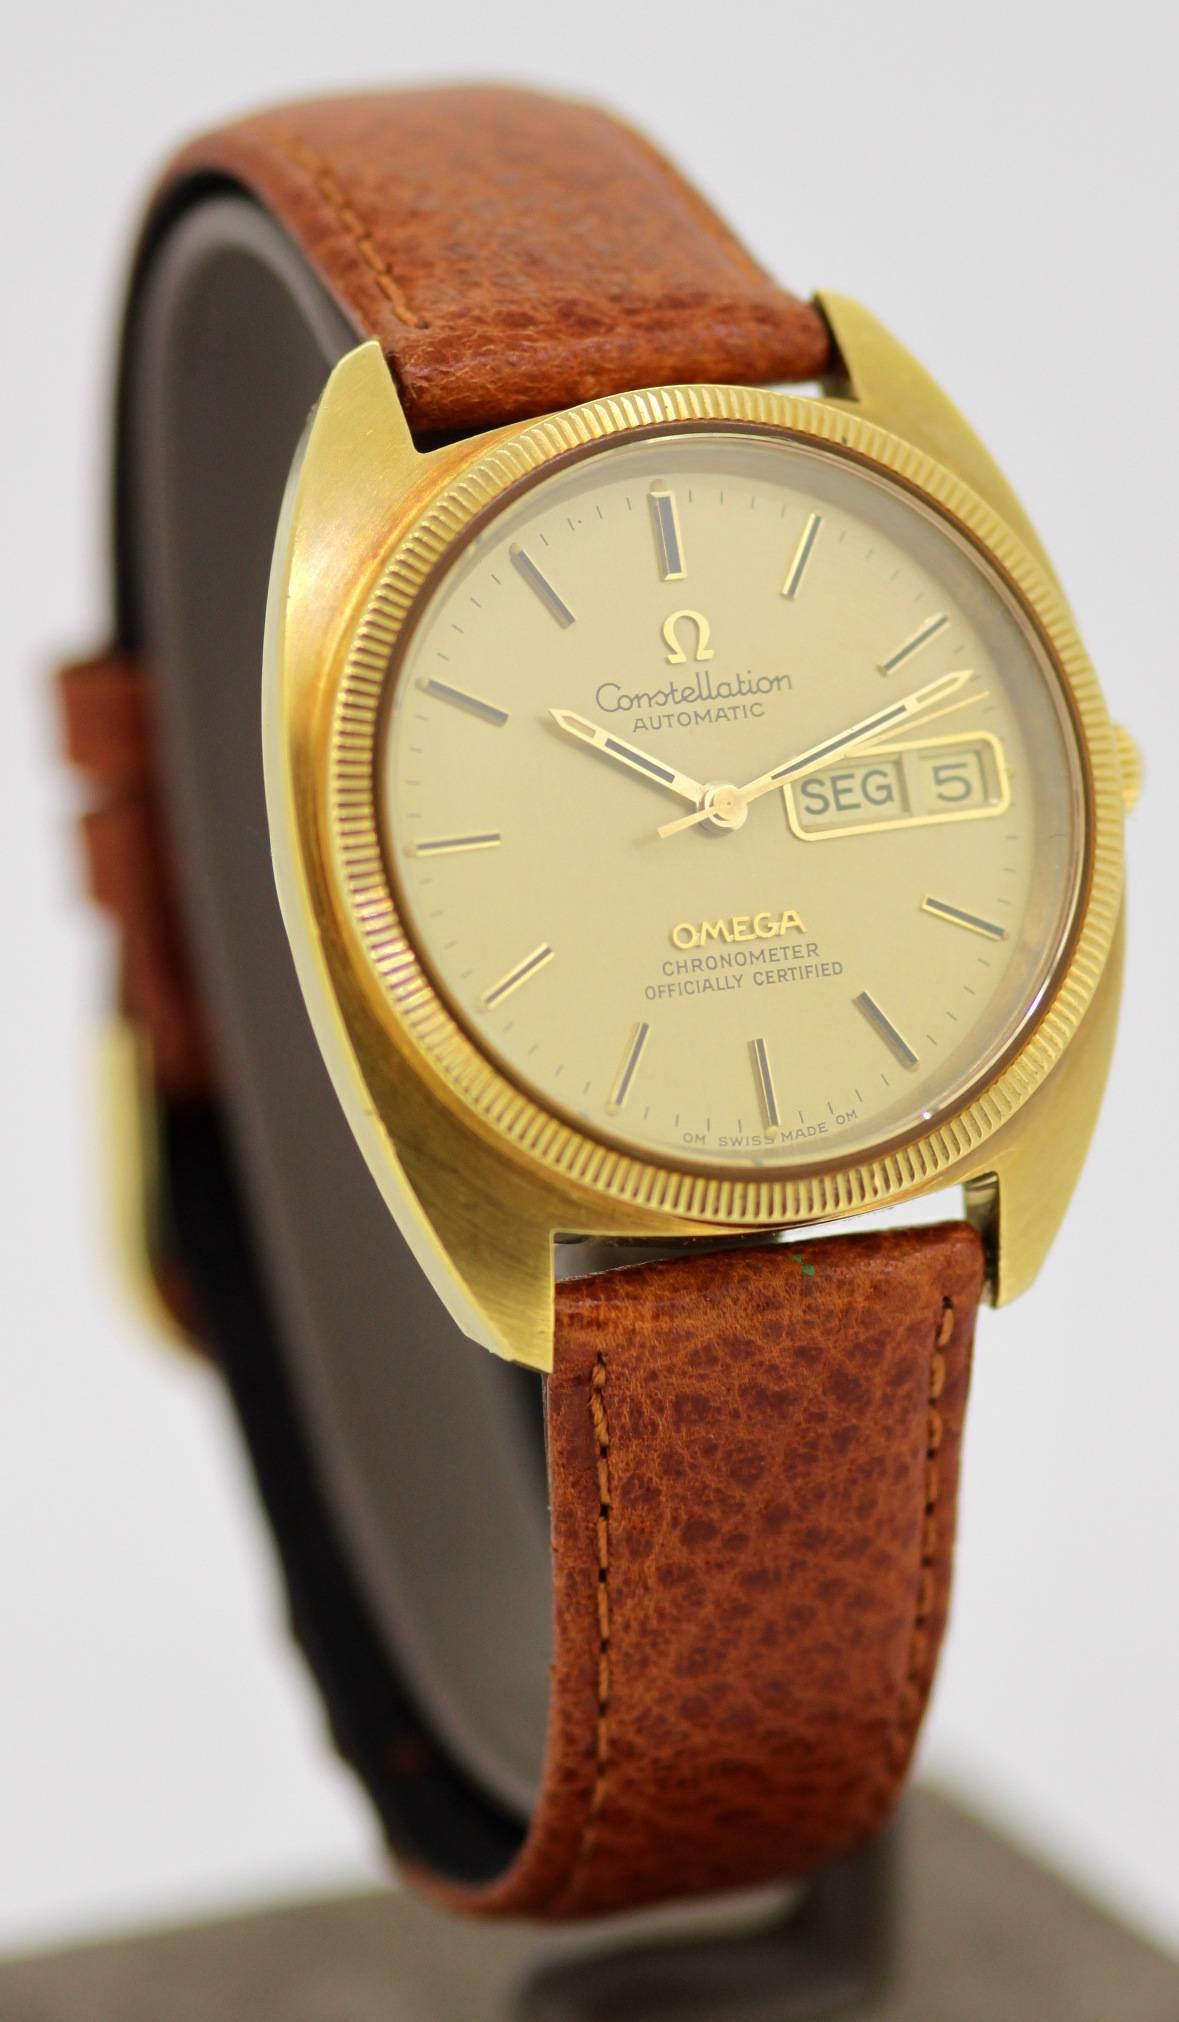 Omega Constellation - Automatic Mens 18K Yellow Gold Wristwatch - 1960's with Portuguese calendar.

Gender: Men
Case size: 42 x 37 mm
Movement: Automatic
Watchband Material: Leather Strap
Case material : 18K Gold
Display Type:	Analogue	
Dial: Gold (